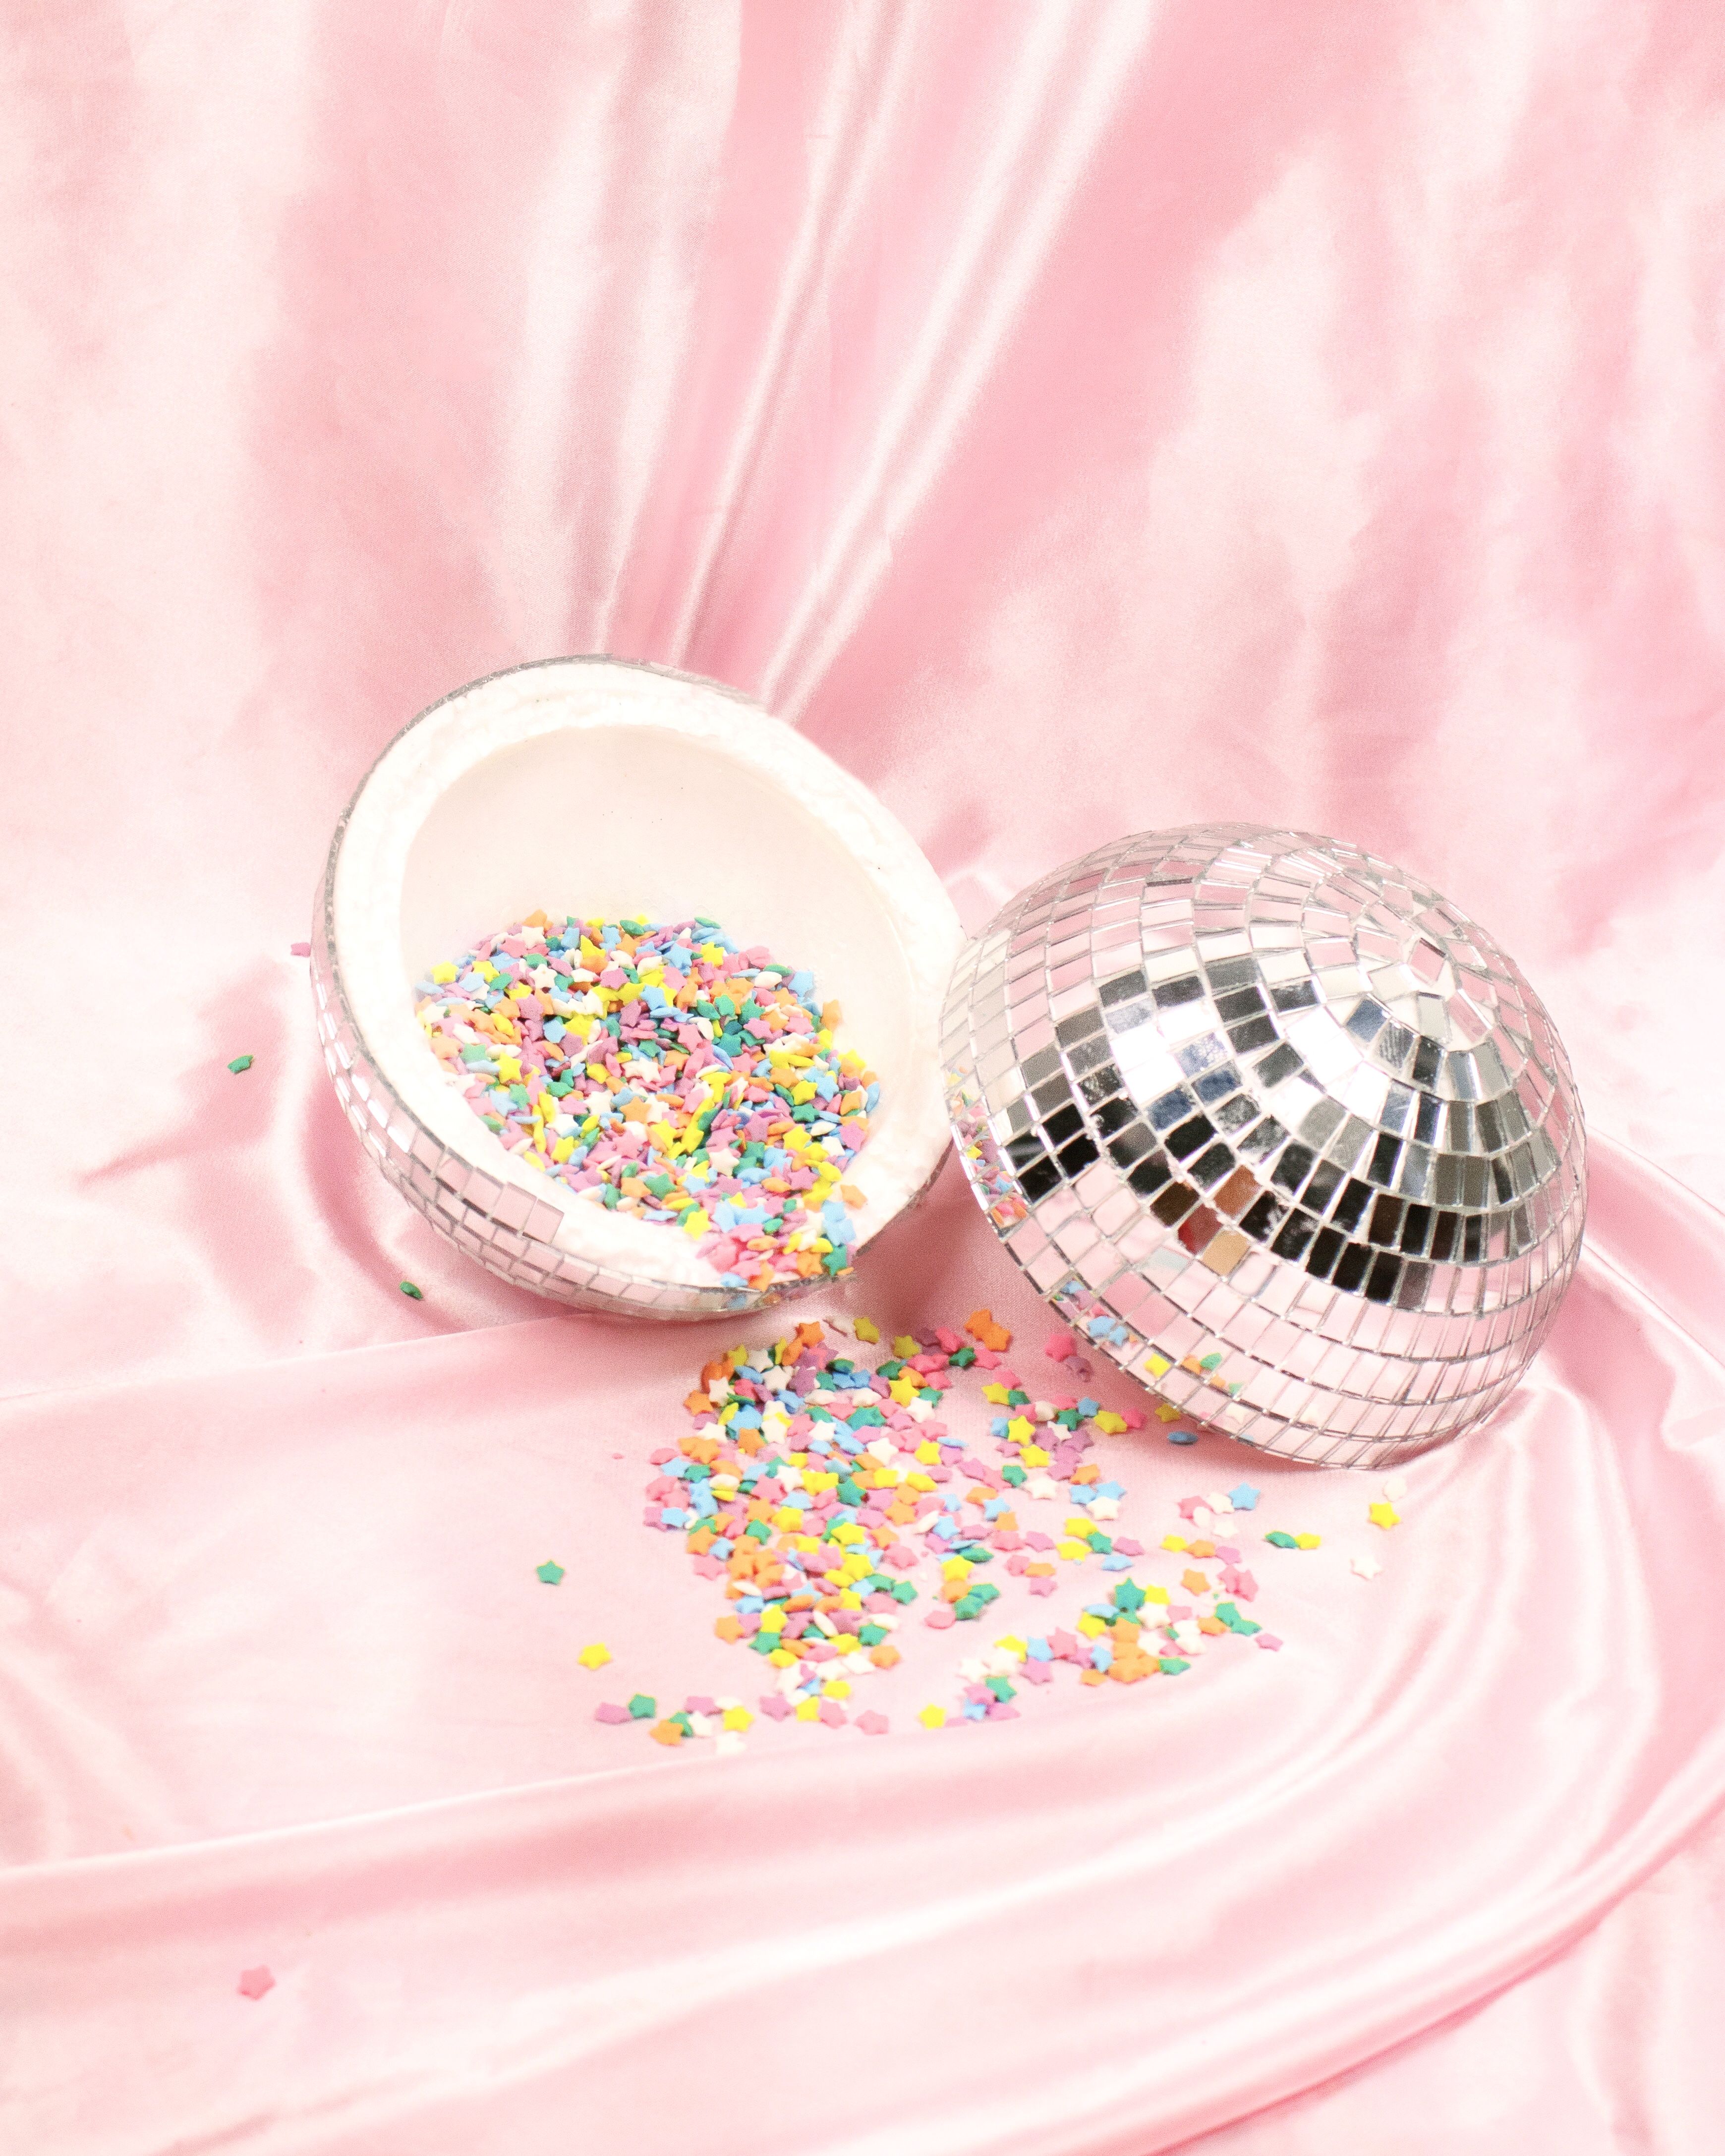 A silver disco ball with sprinkles on it - Birthday, candy